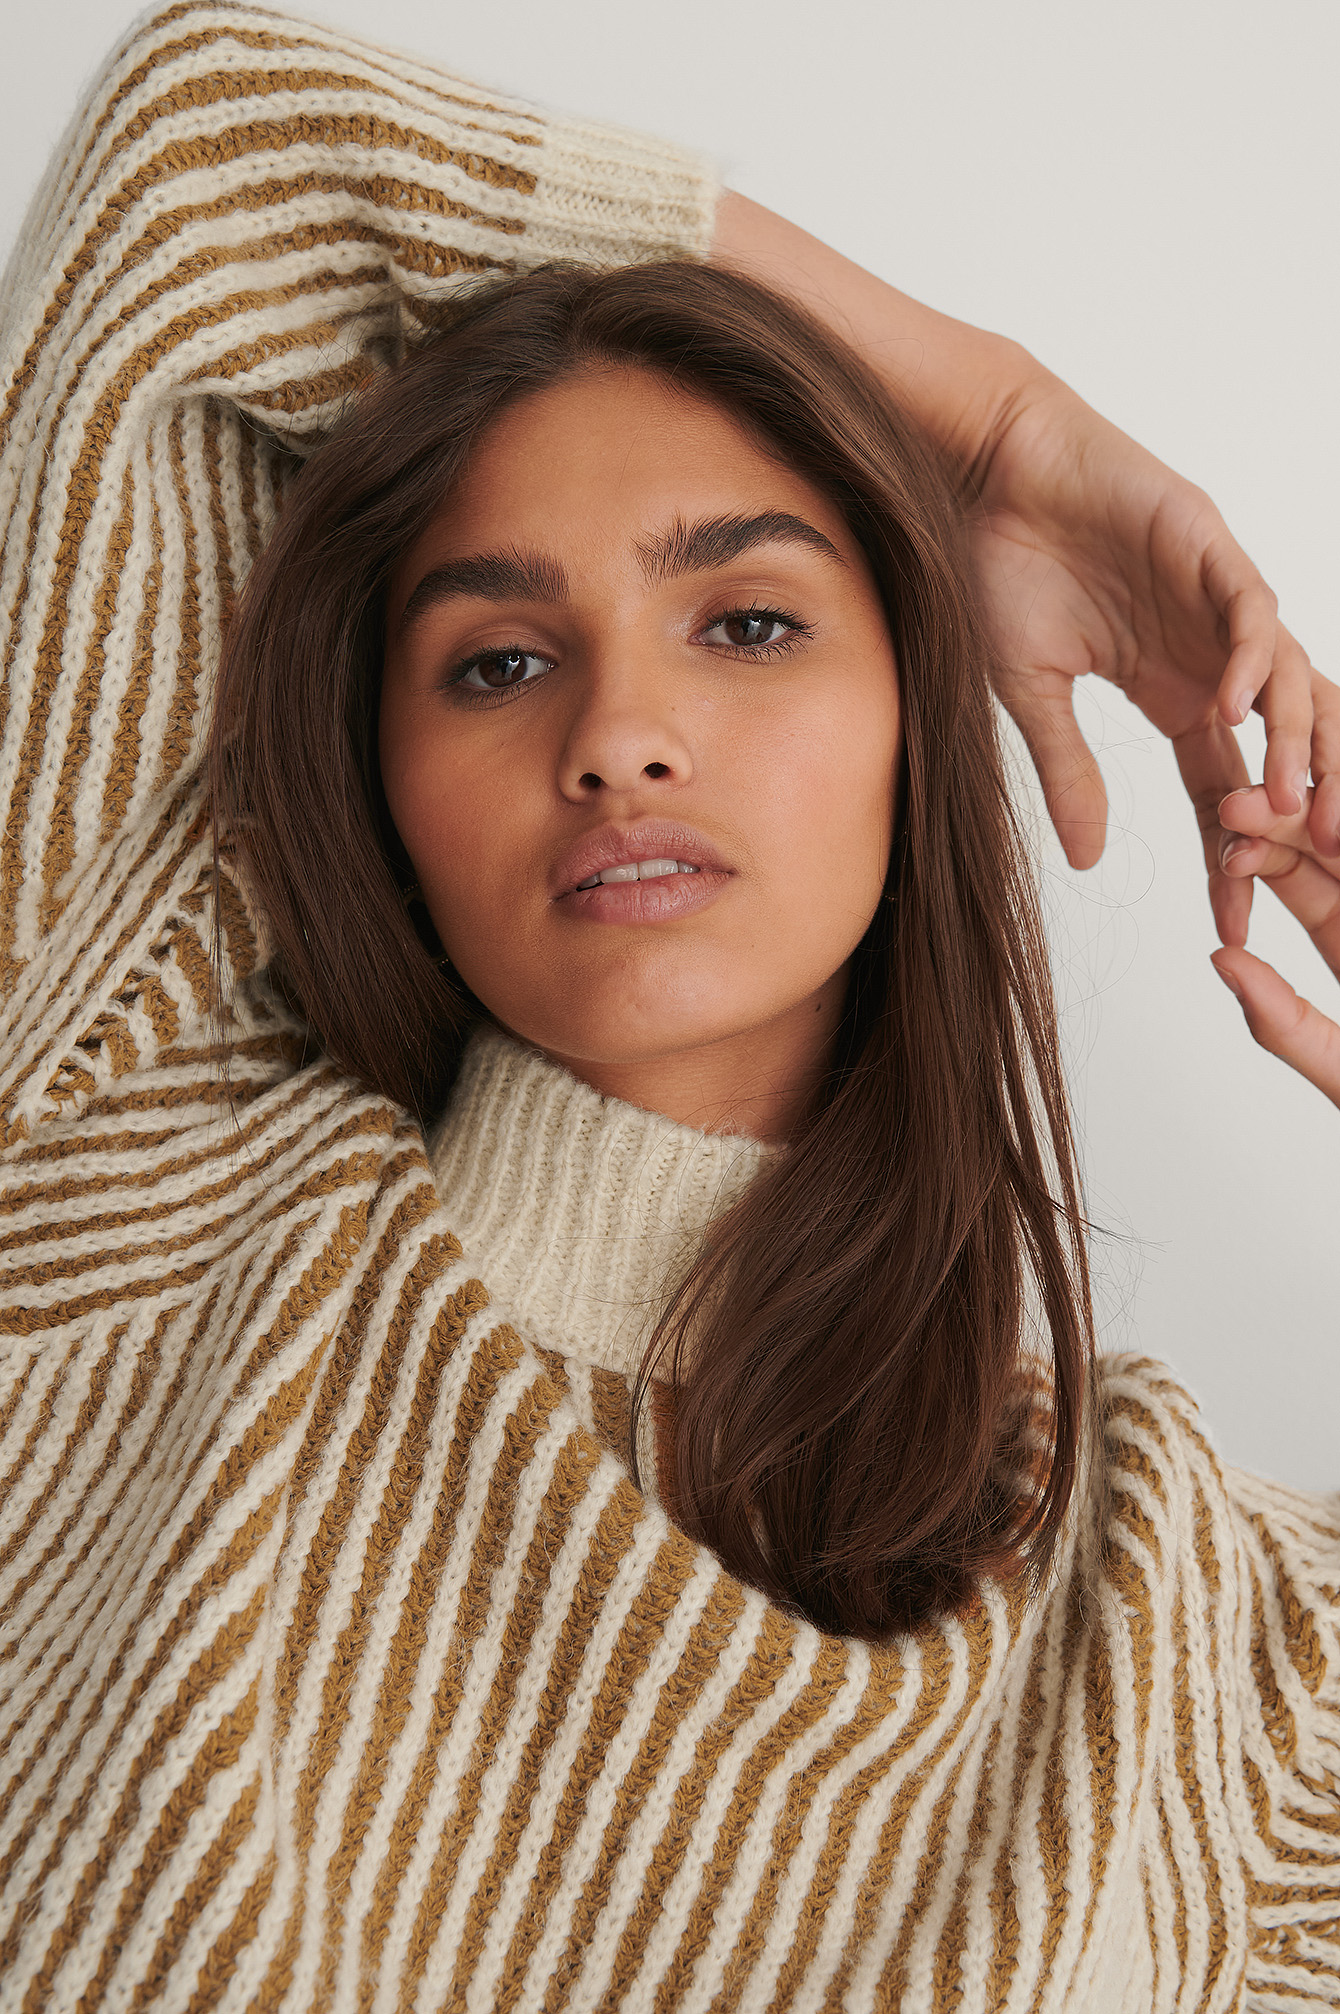 Beige/White Sleeve Detail Striped Knitted Sweater